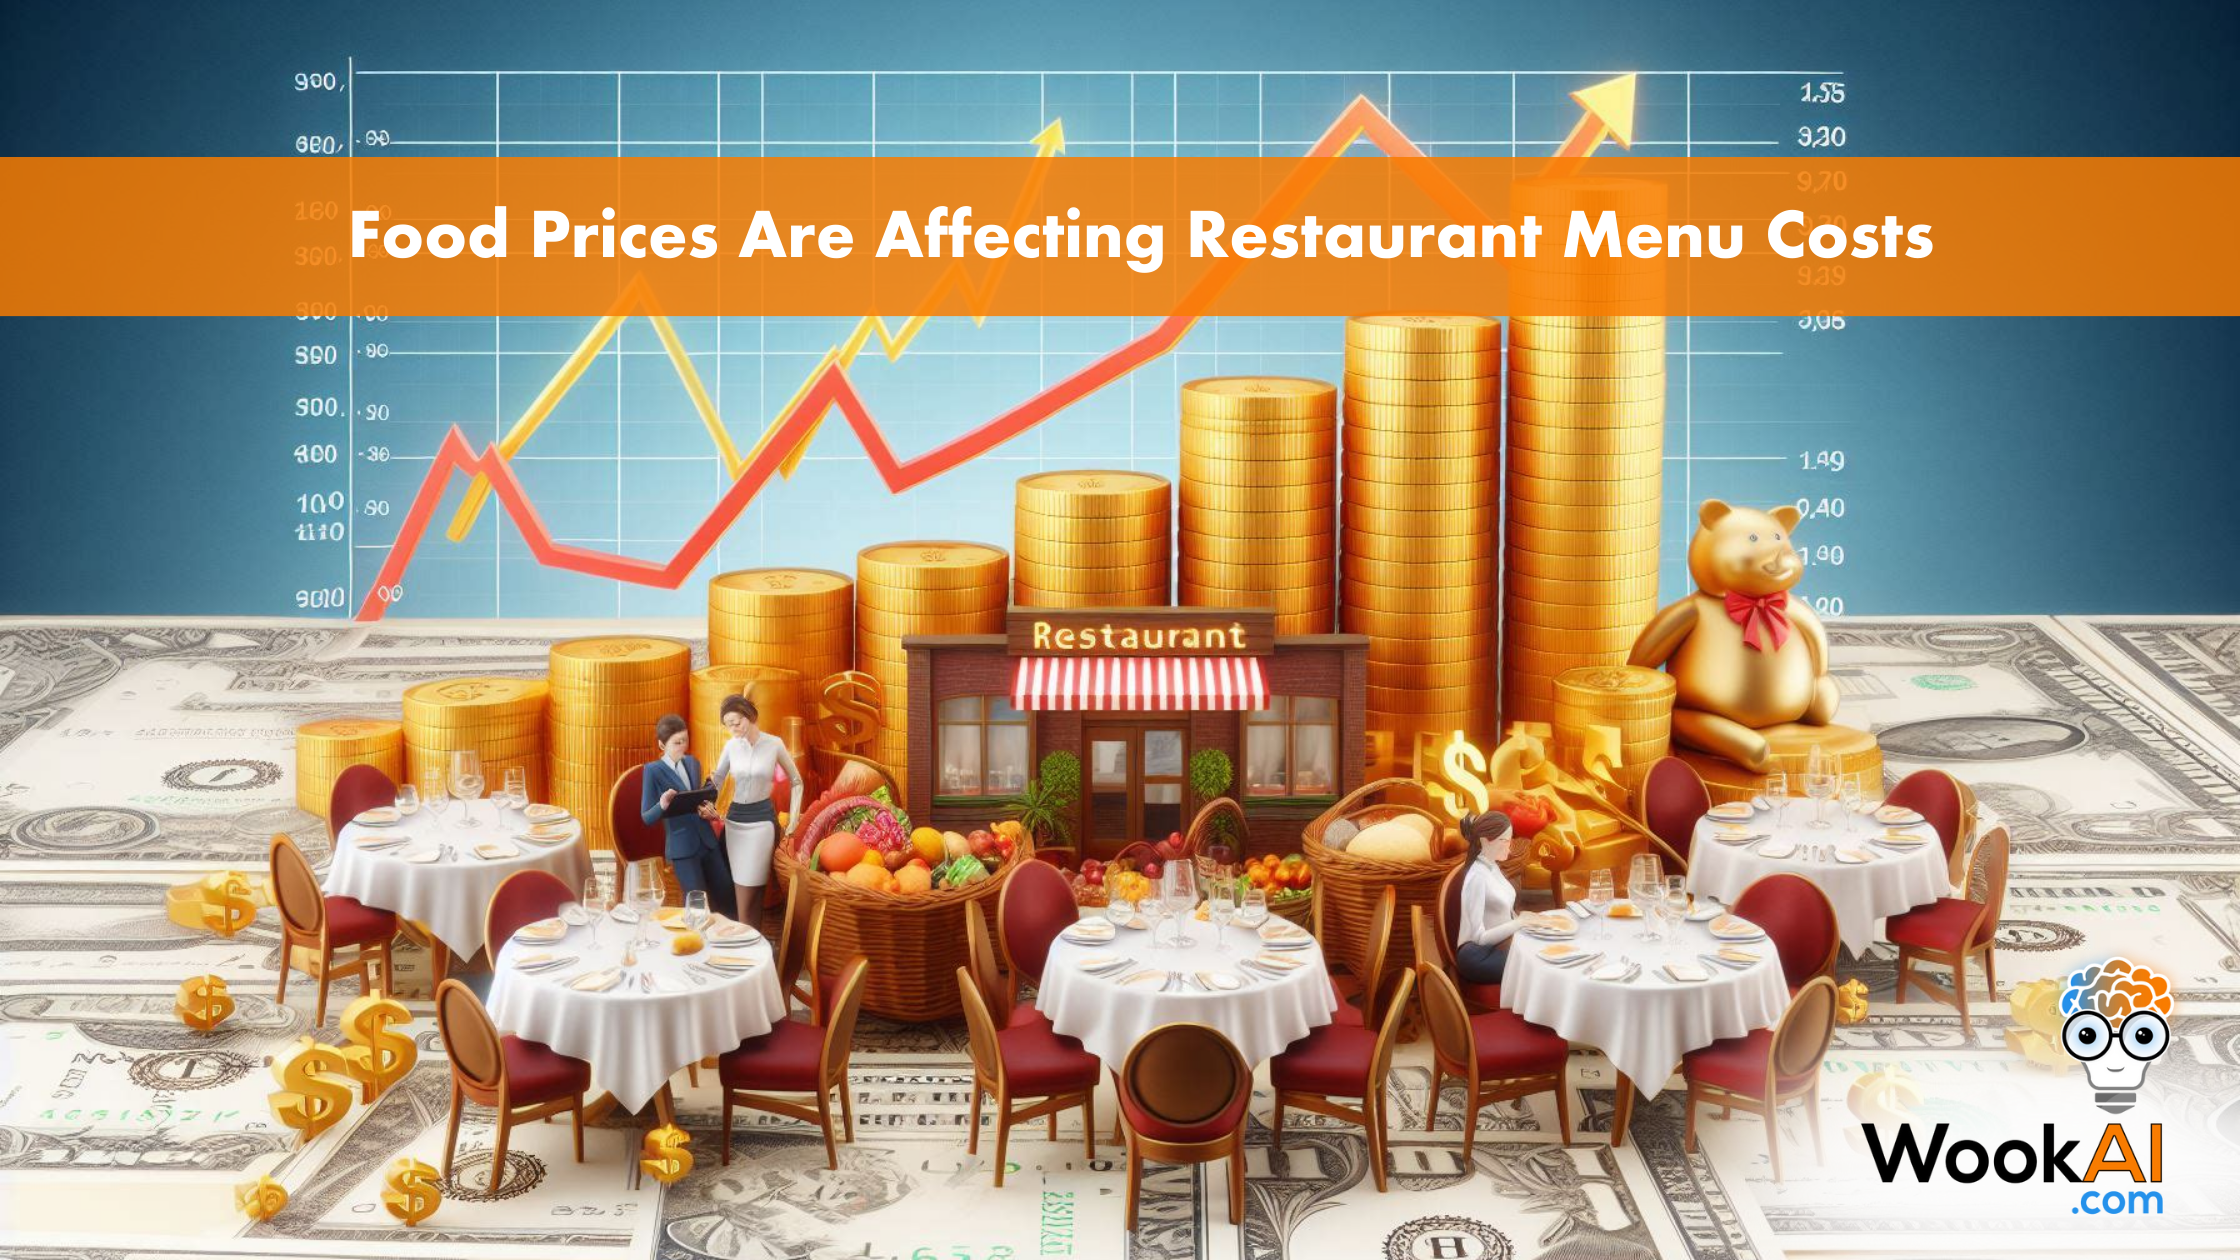 Inflation Slowing Down: But Food Prices Are Affecting Restaurant Menu Costs